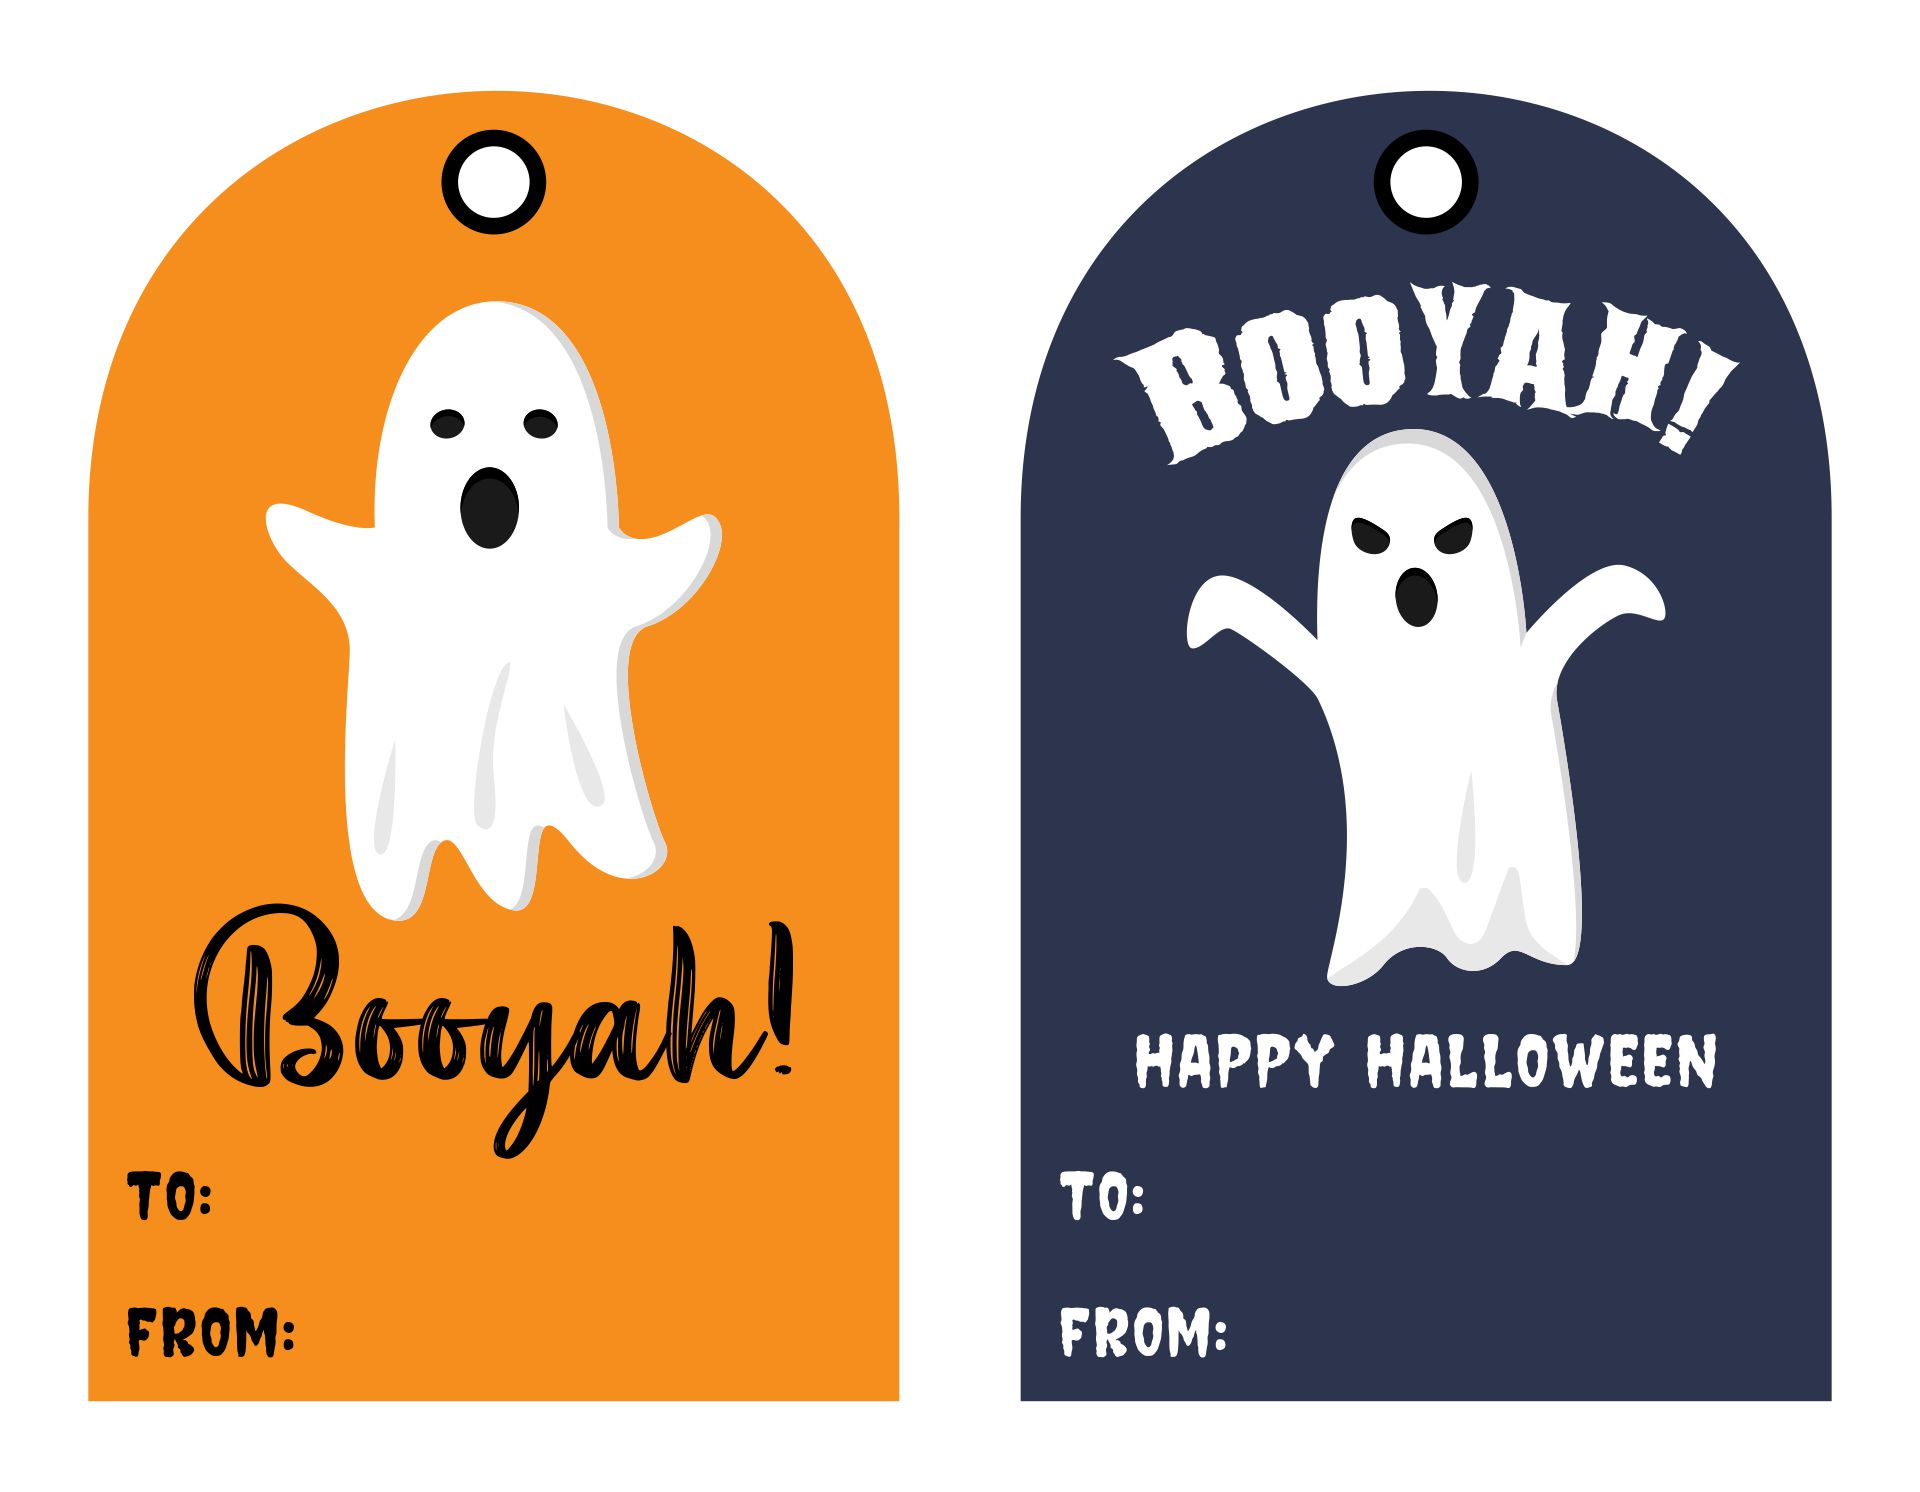 Adorable Printable Halloween Tags For Booing Friends And Neighbors